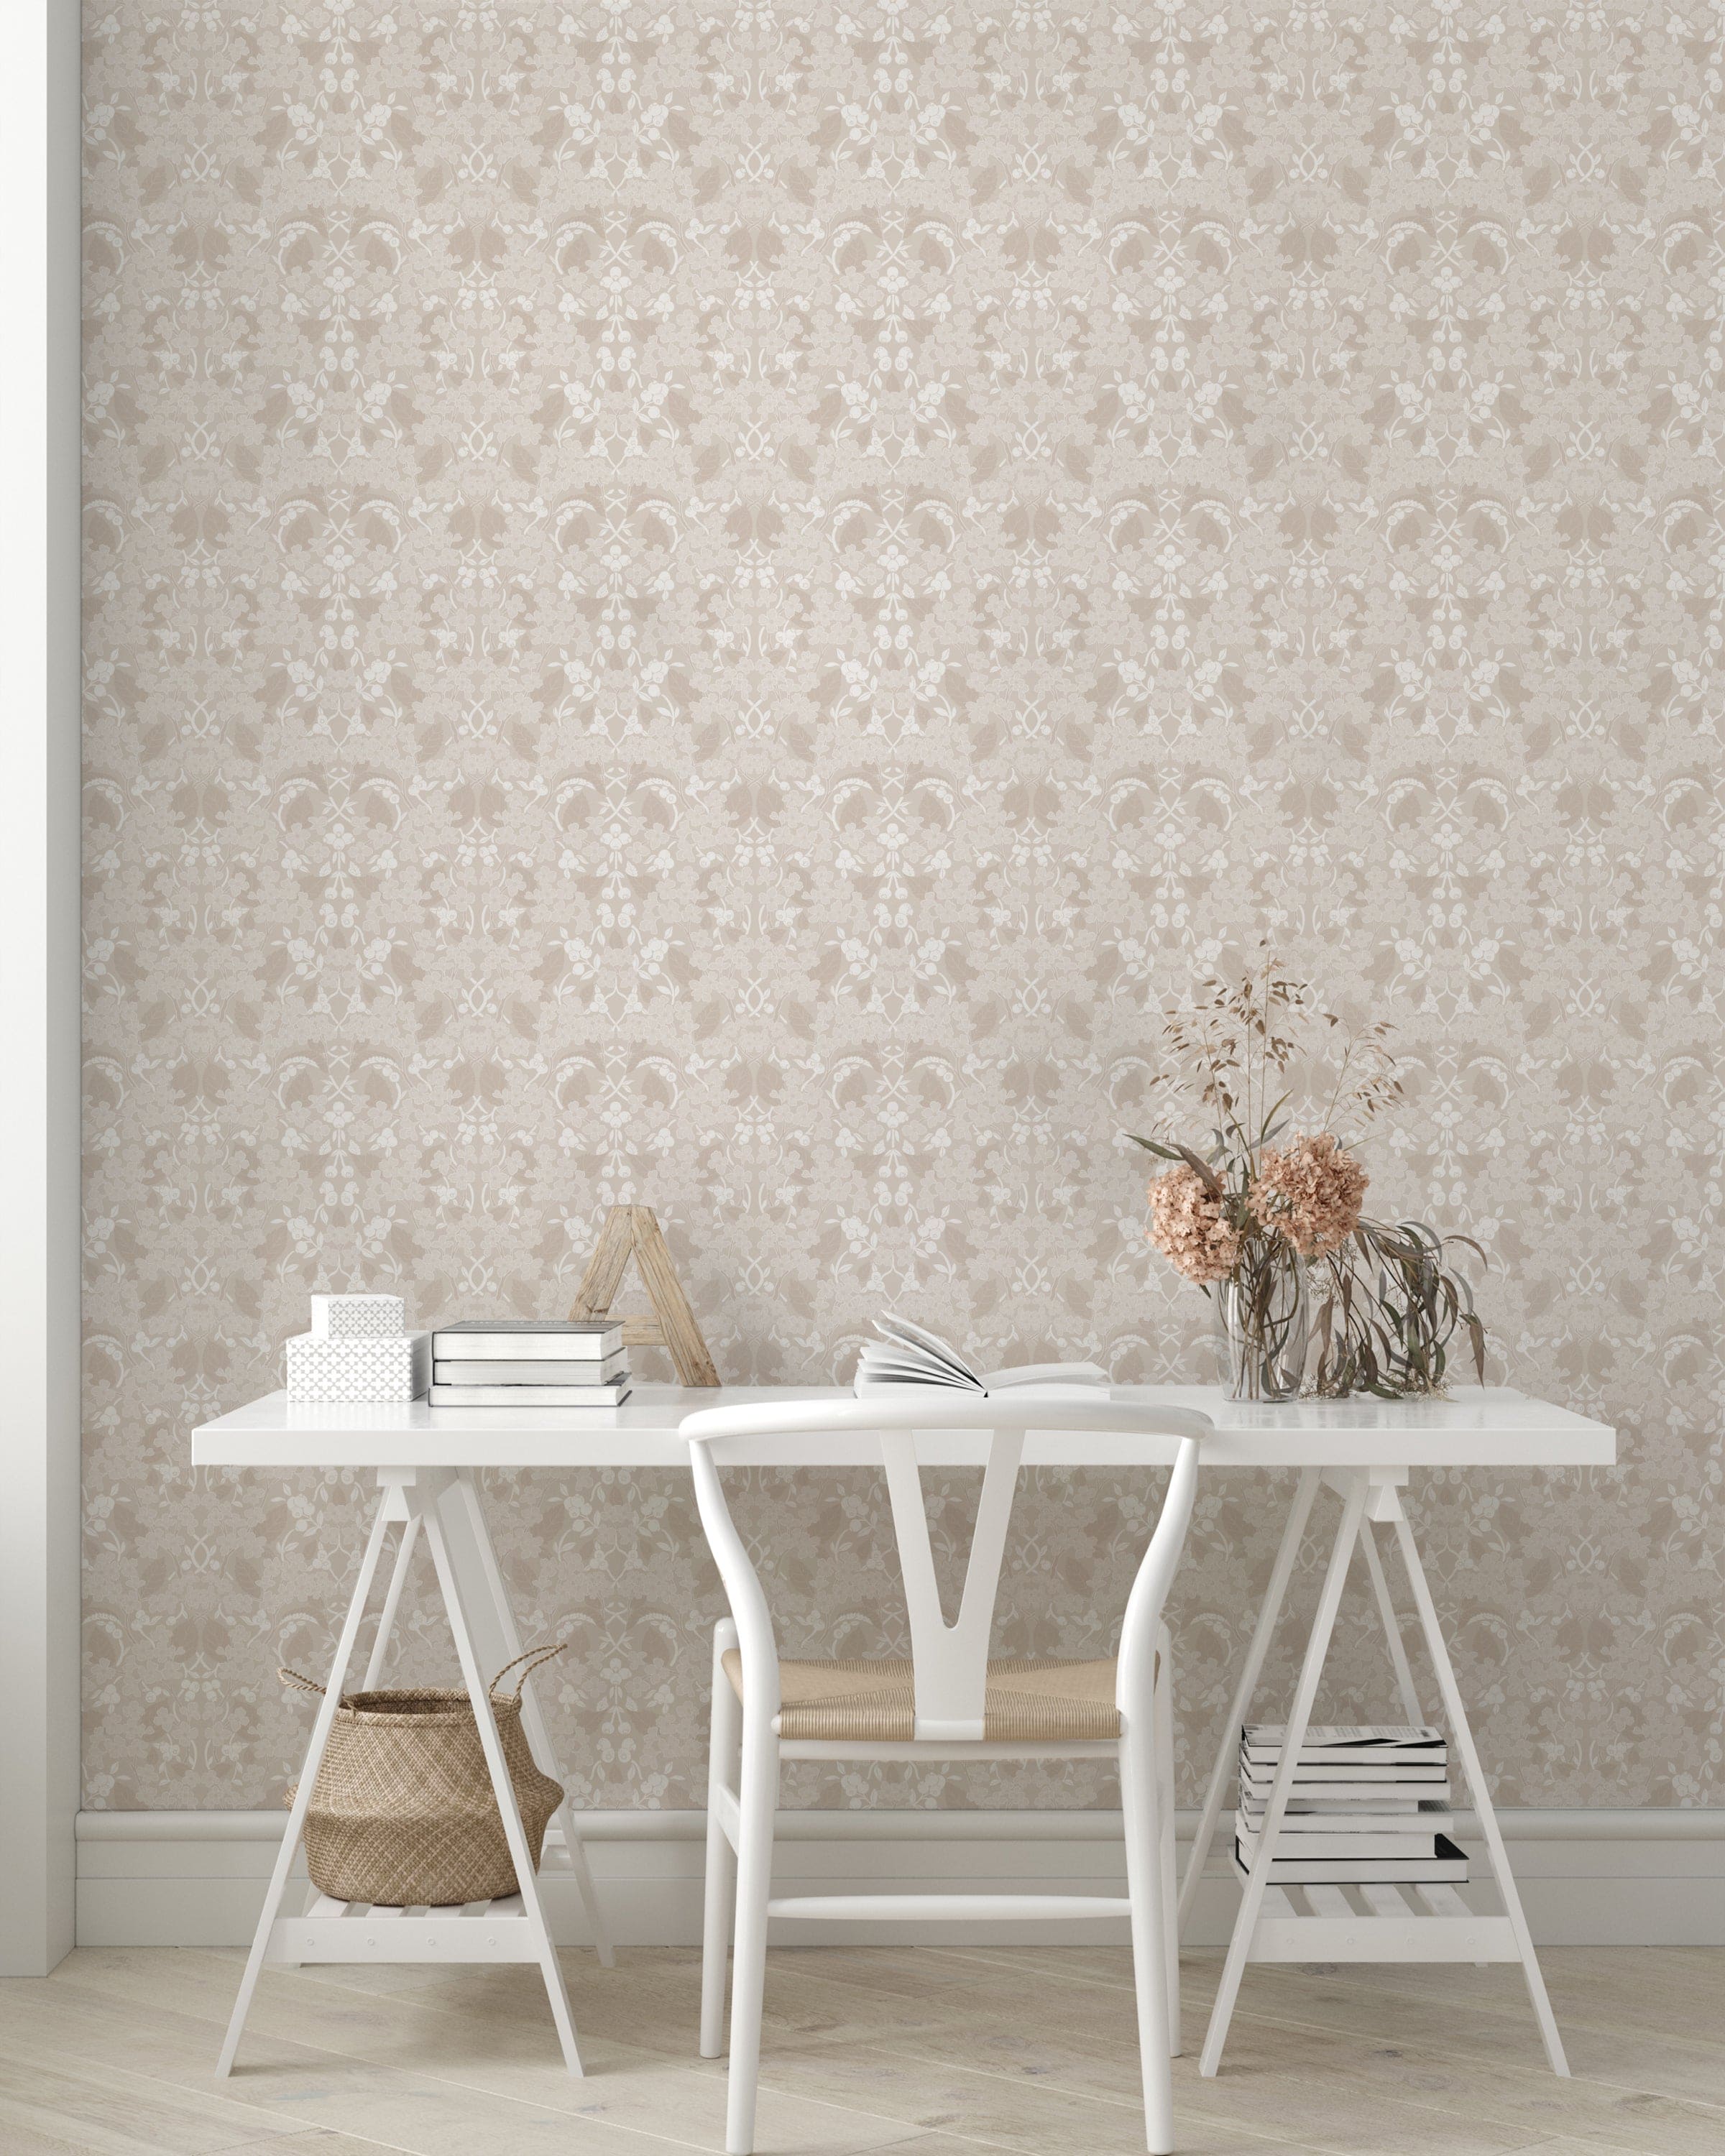 A minimalist workspace with Linen Morris Wallpaper as the backdrop. The light beige floral wallpaper complements the white modern desk and chair set, enhanced by natural wood accents and dried flowers for a calm, productive environment